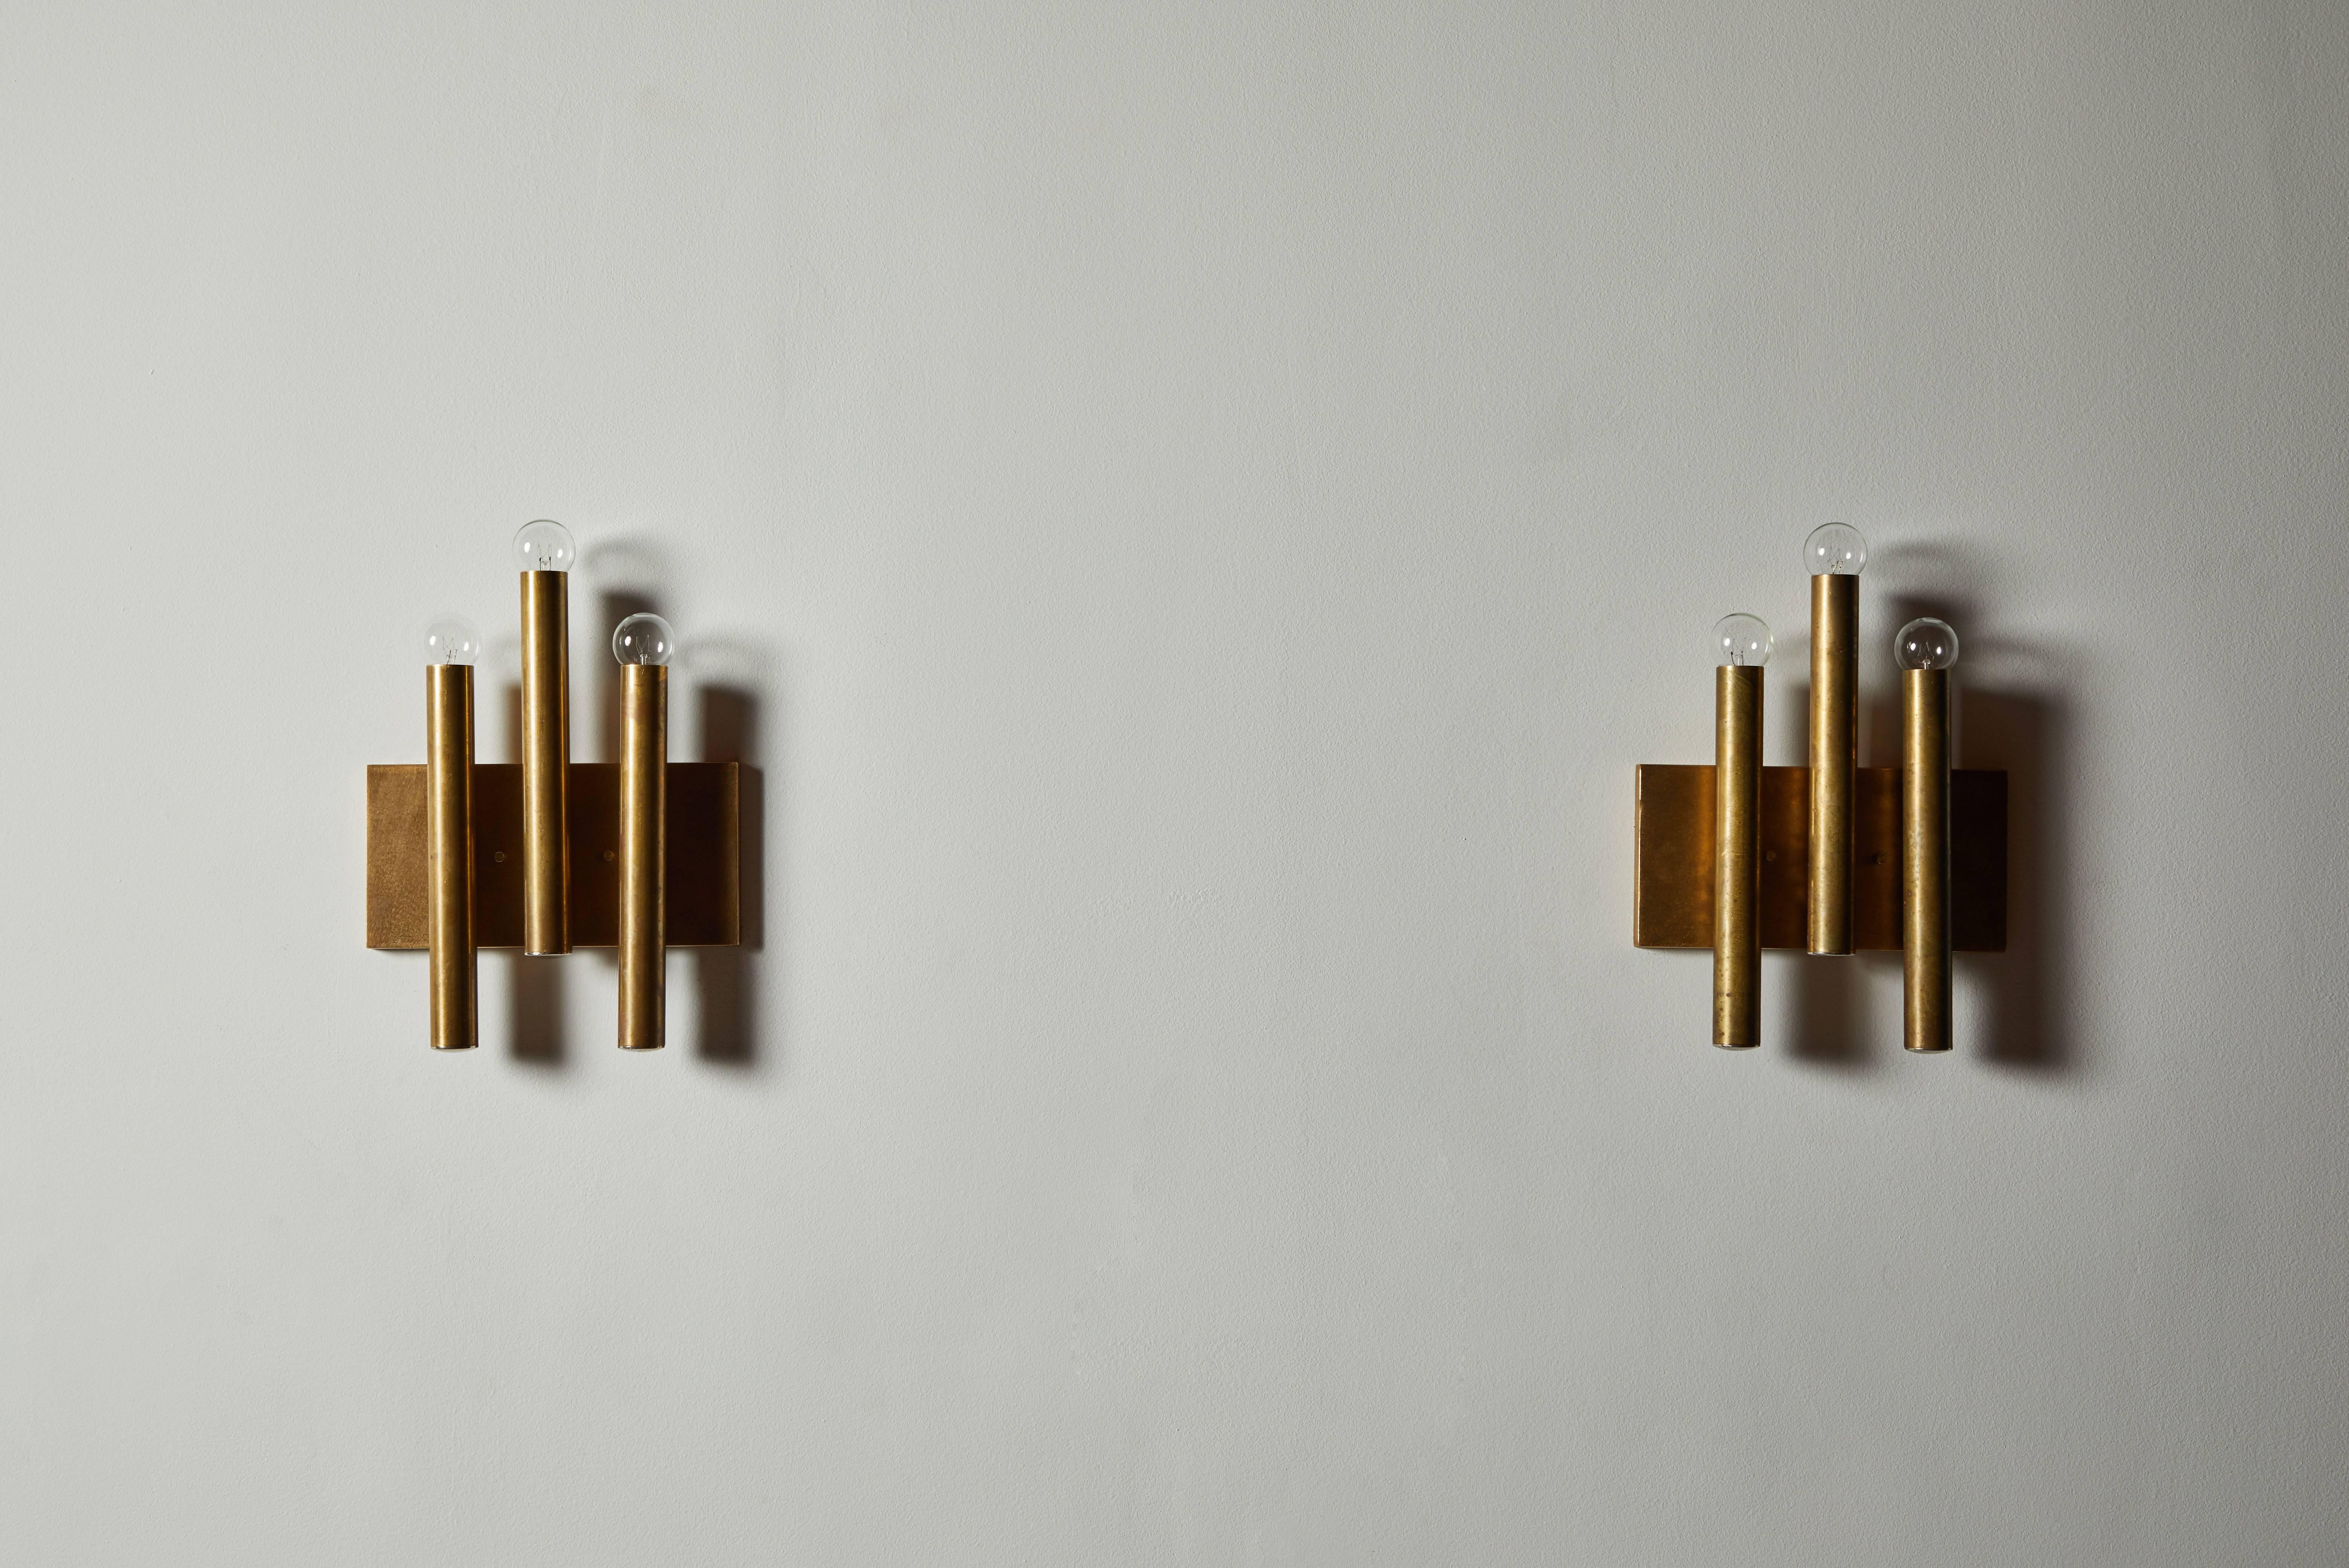 Single Italian Sconce in the Style of Gio Ponti for Candle (Moderne der Mitte des Jahrhunderts)